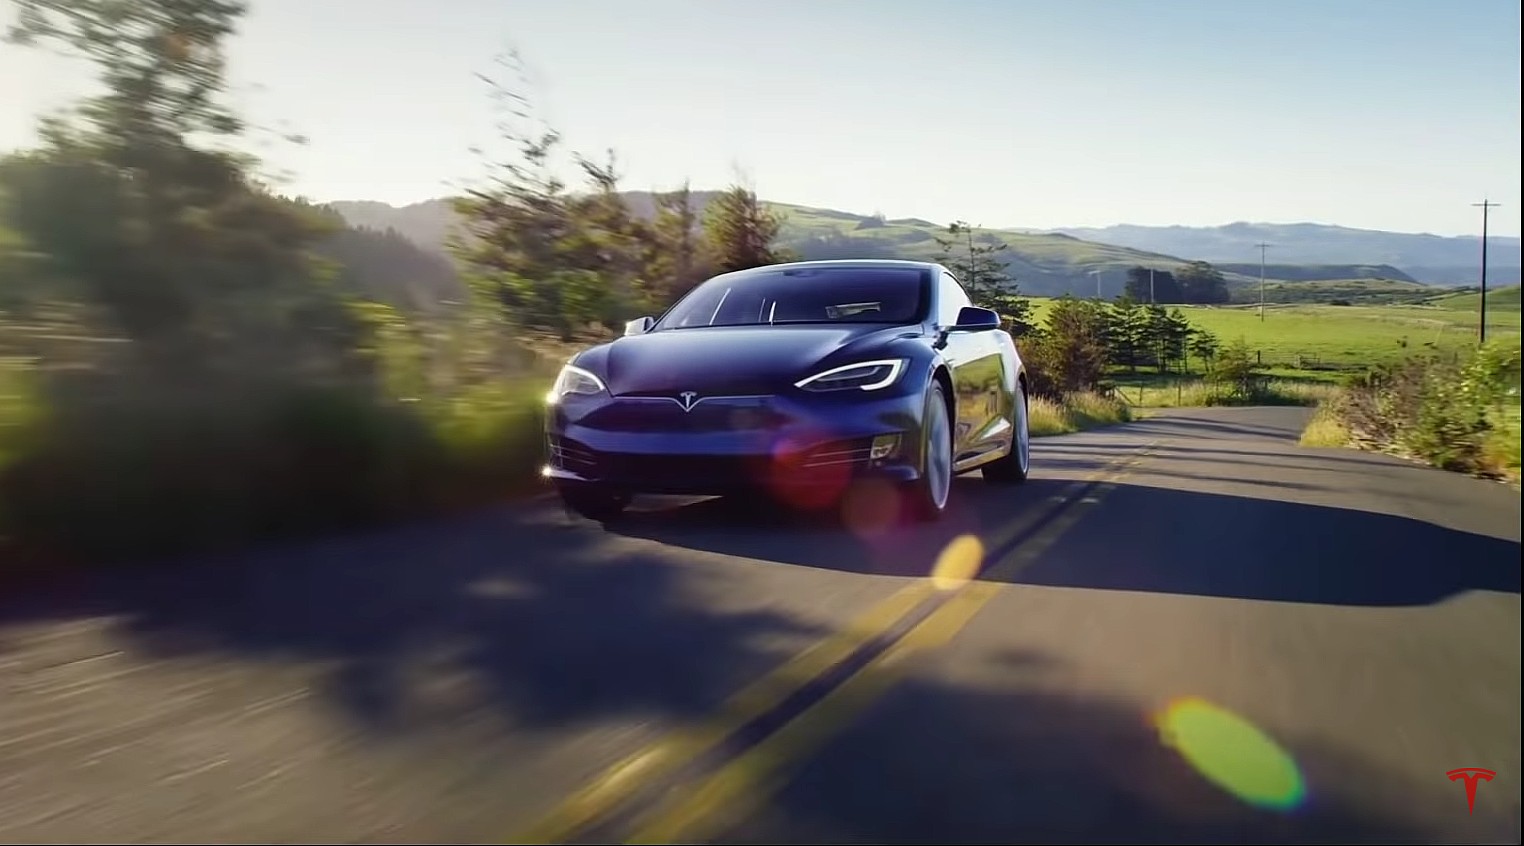 Tesla sets the record straight on ‘unintended acceleration’ claims